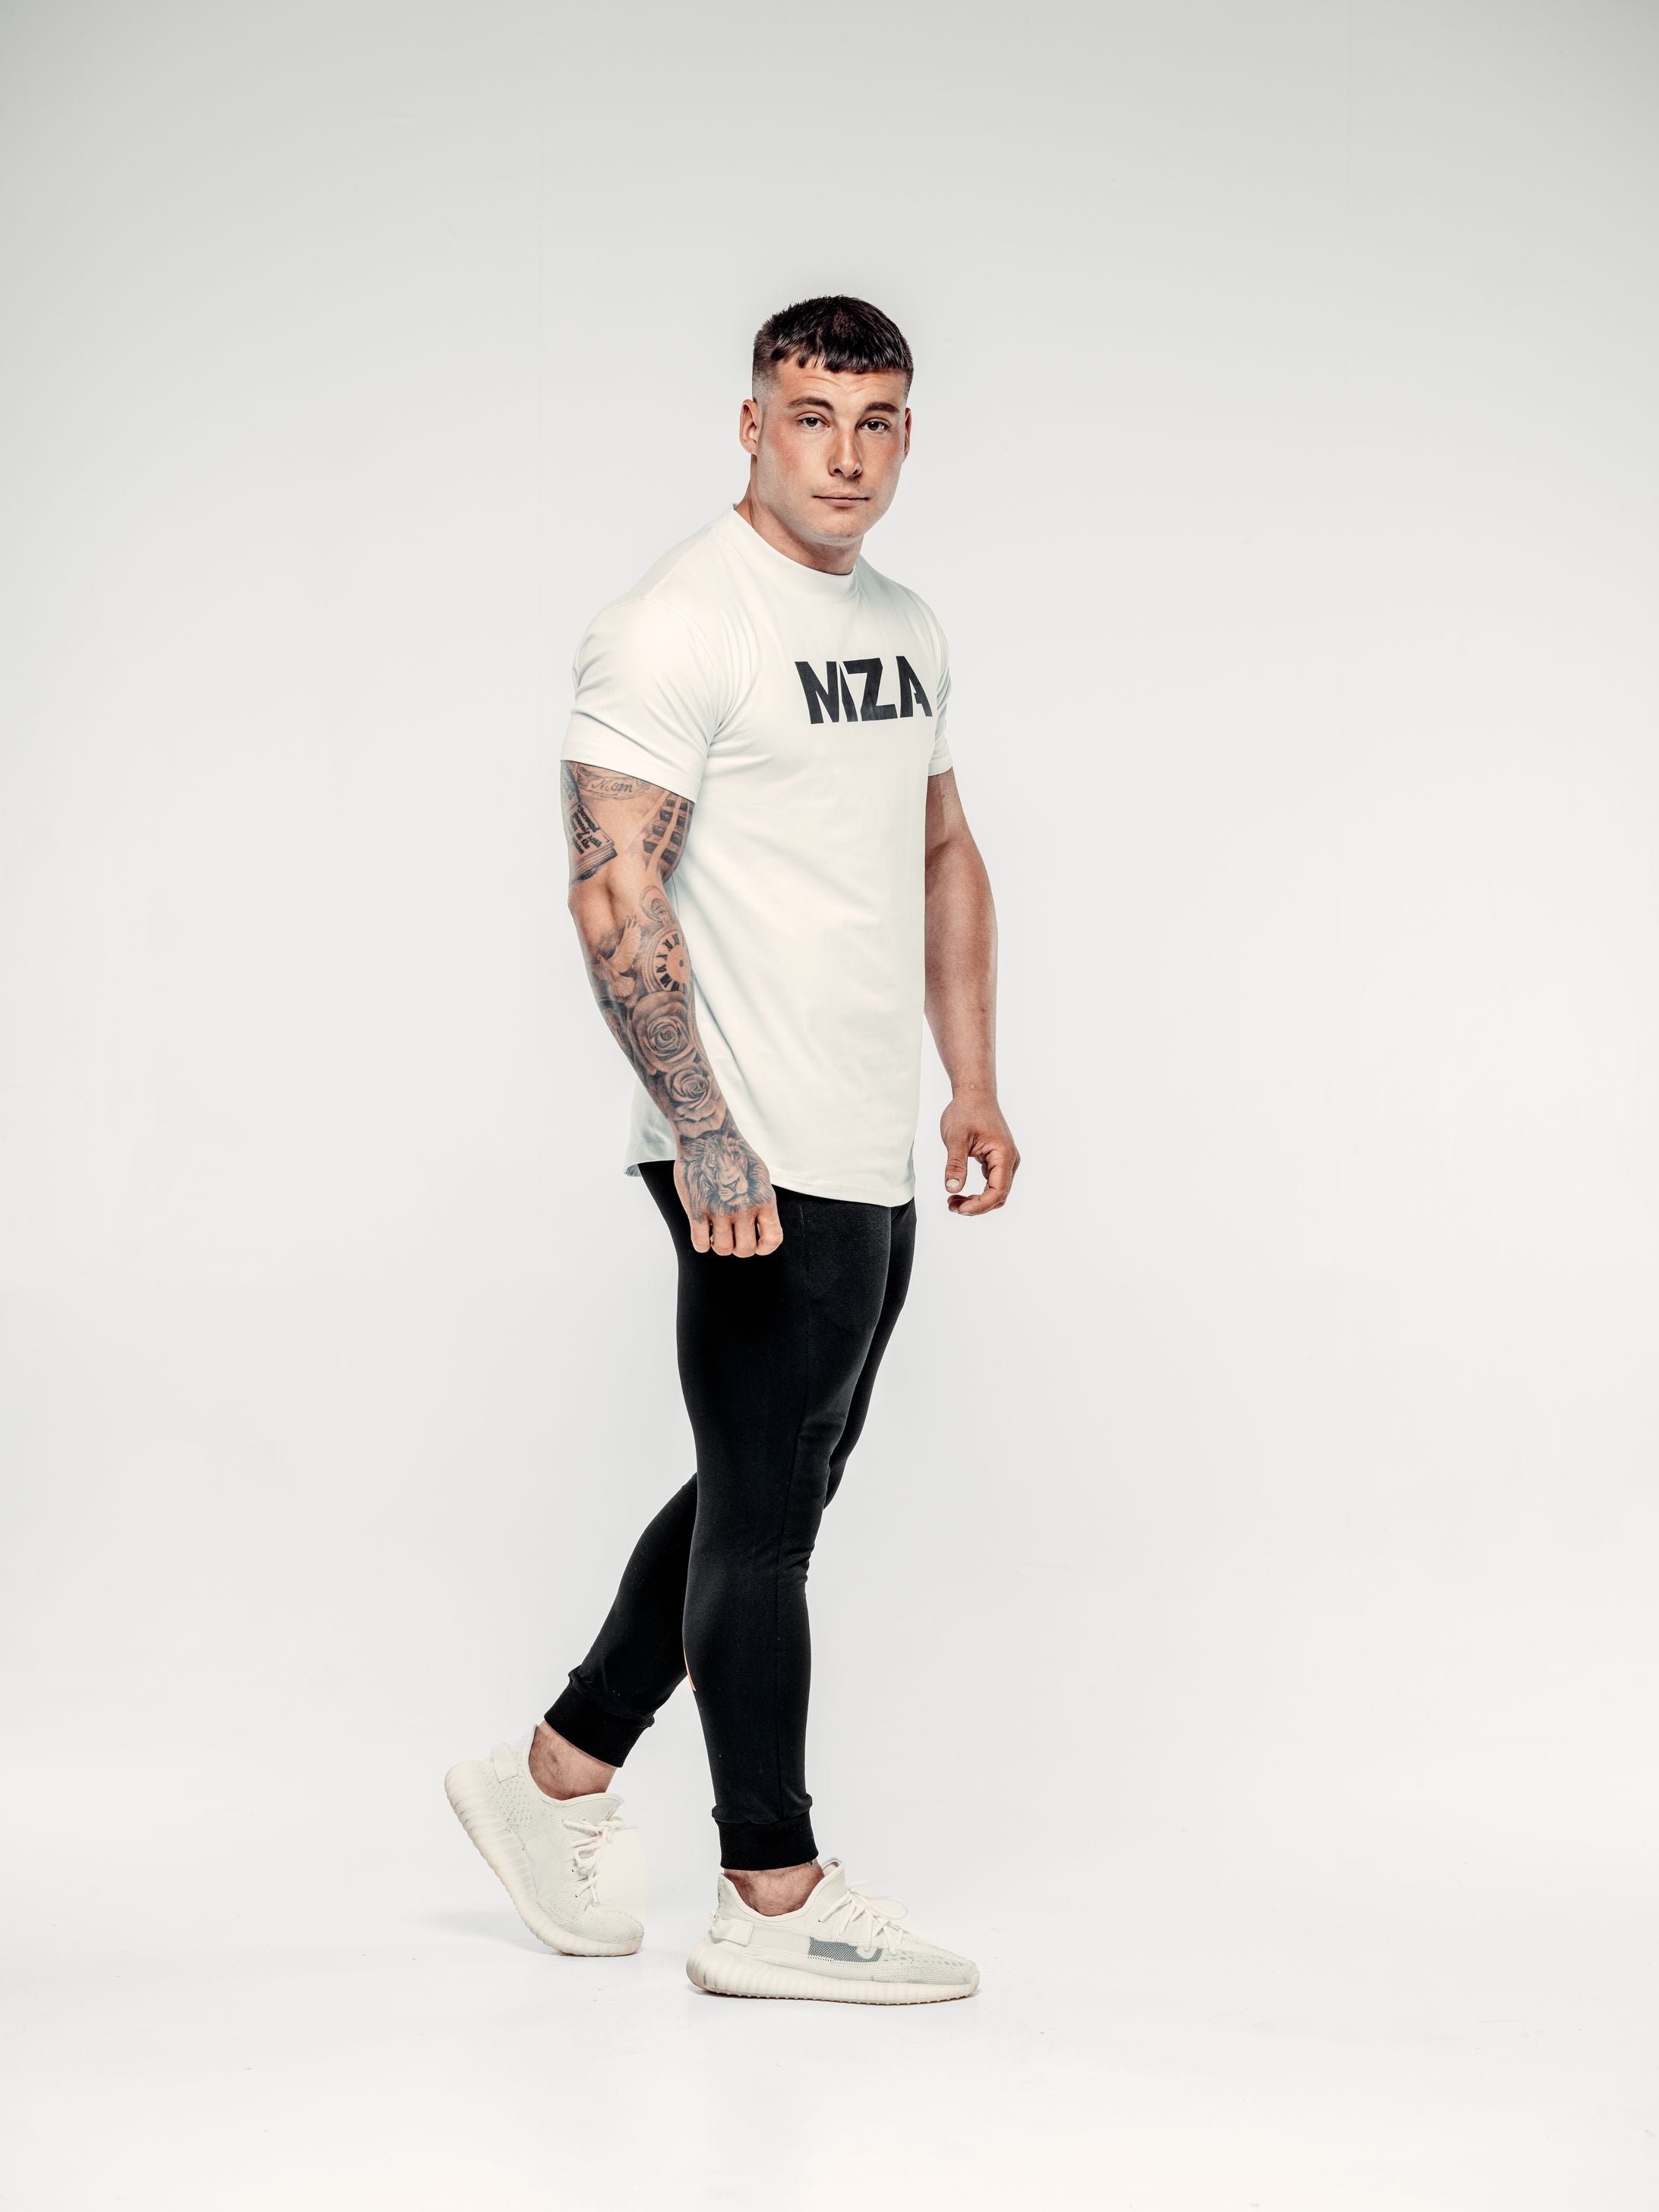 This is Lewis mid step wearing the new standard long line t-shirt in white and the new standard joggers in black